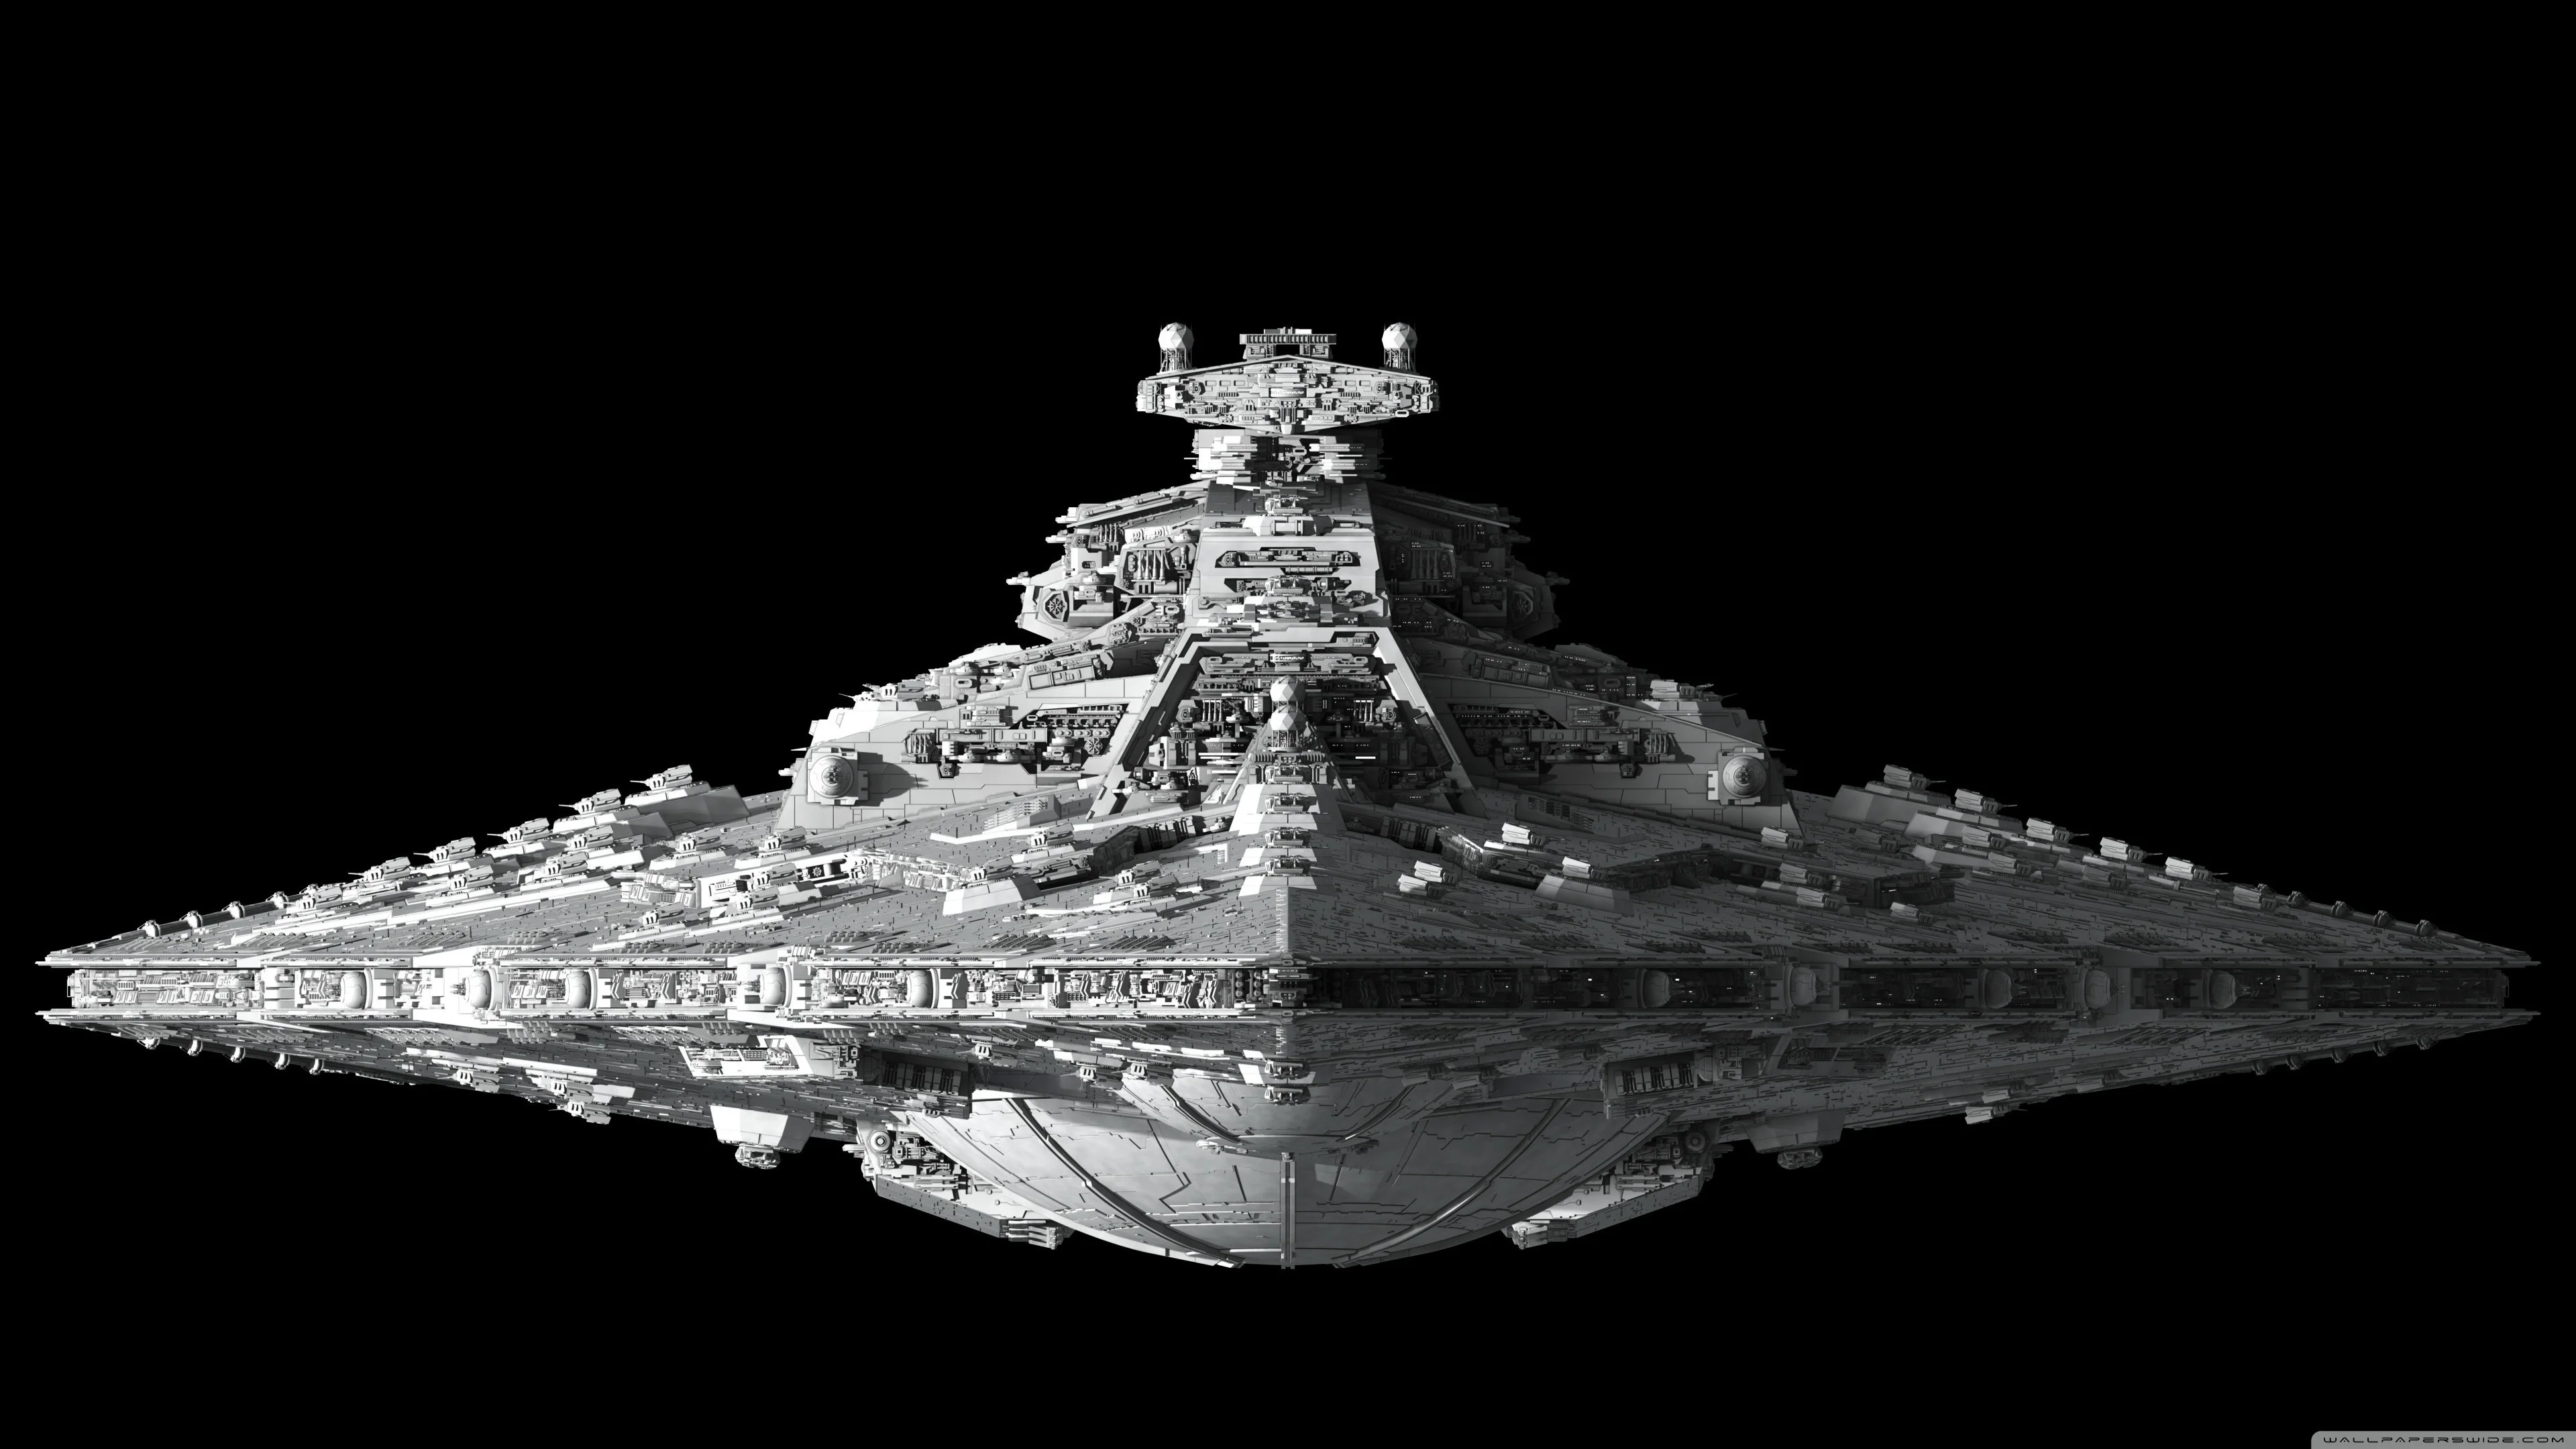 Star Wars digital art modeling Star Destroyer Free HQ and widescreen wallpapers